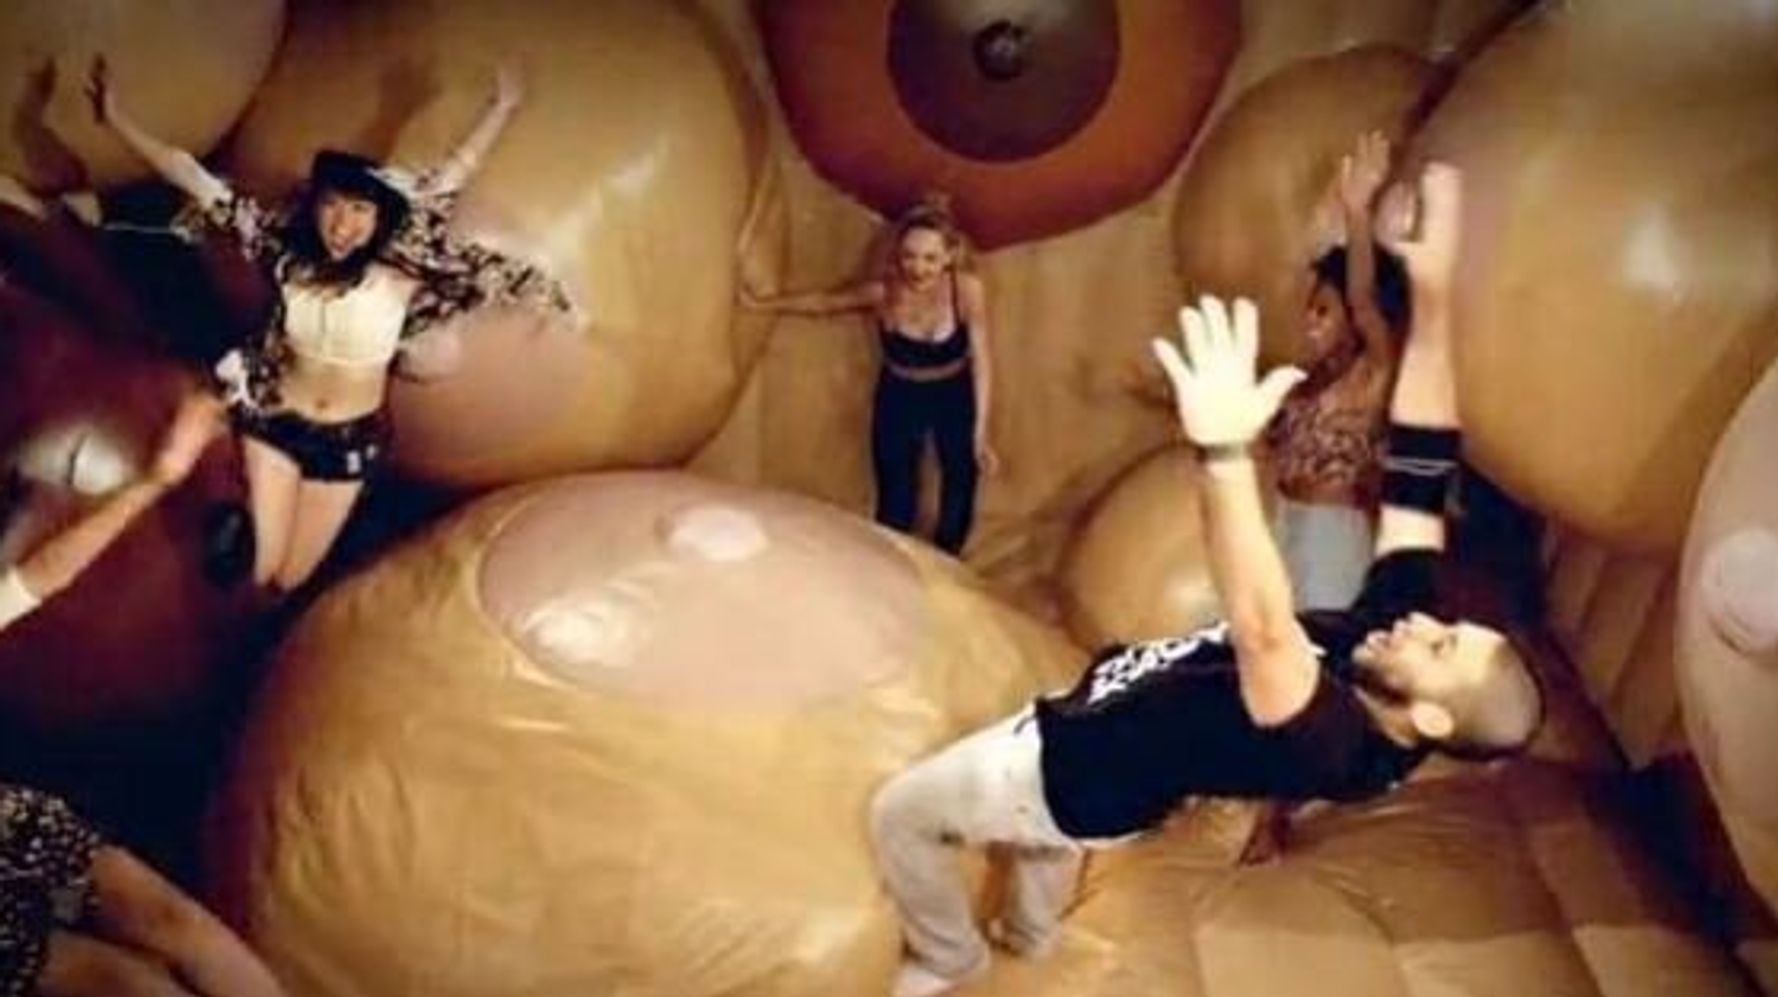 New Museum Of Sex Exhibit Features Boobie Bouncy House And More (VIDEO)